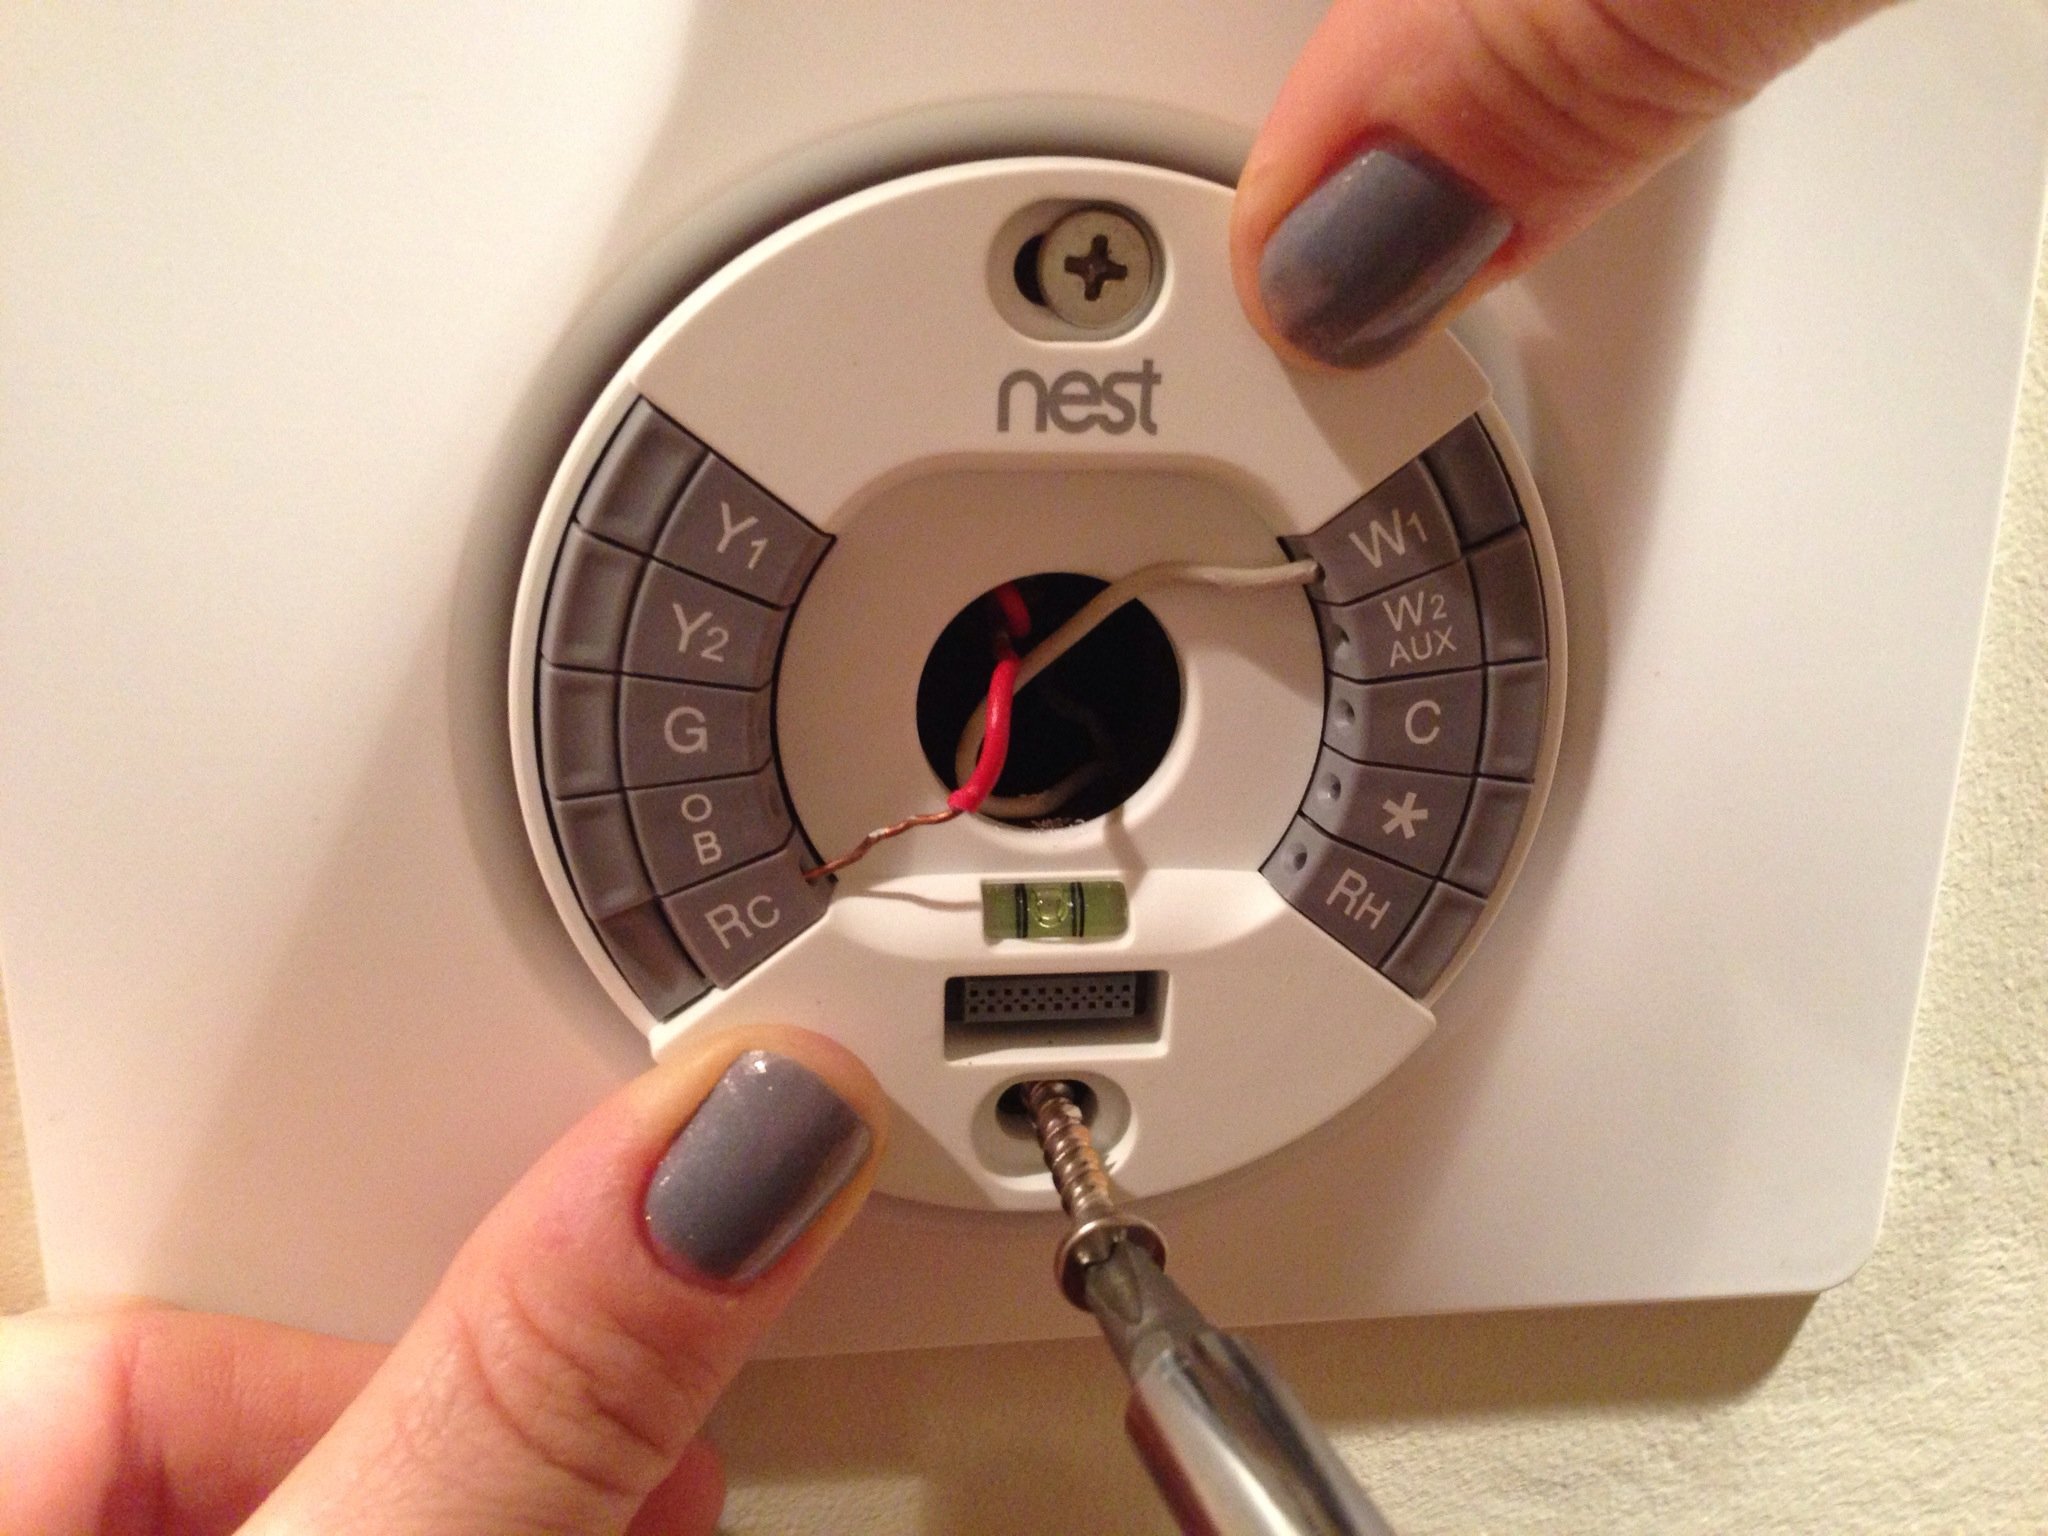 How to install a 2nd generation nest thermostat - B+C Guides  Nest Thermostat 2 Wiring Diagram    Guides - Brit + Co